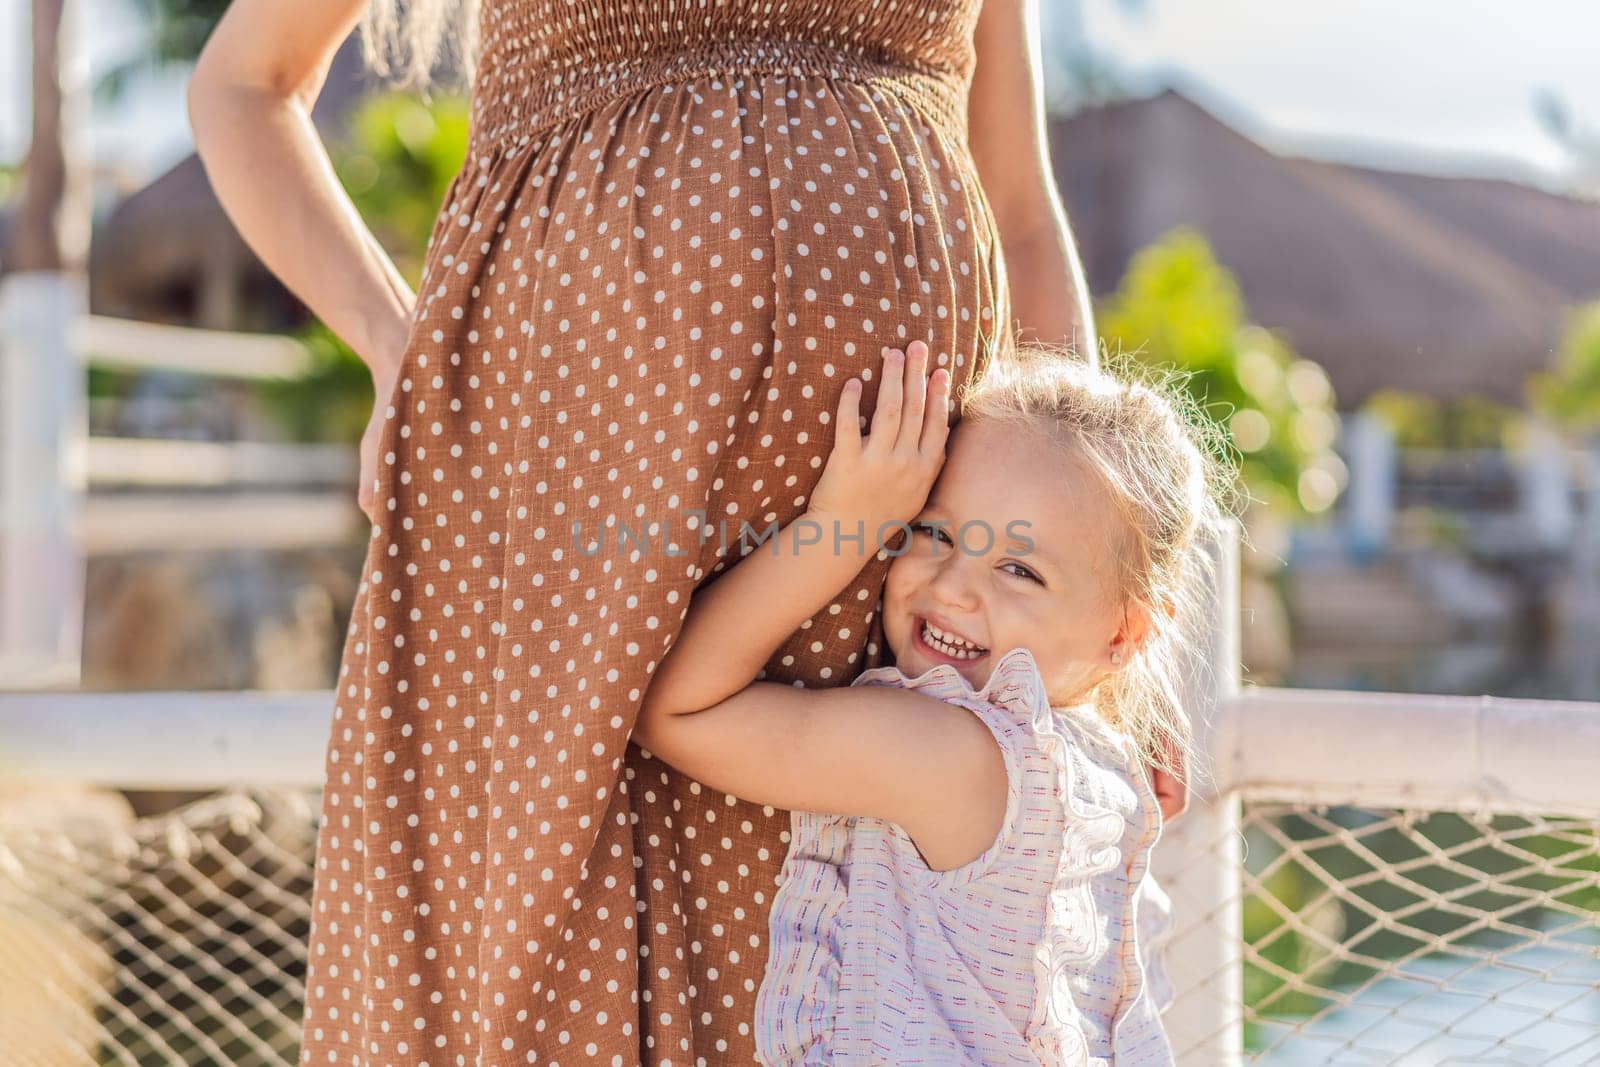 A heartwarming moment captured as a daughter lovingly embraces her mother's pregnant belly, sharing in the excitement and anticipation of a new family member.